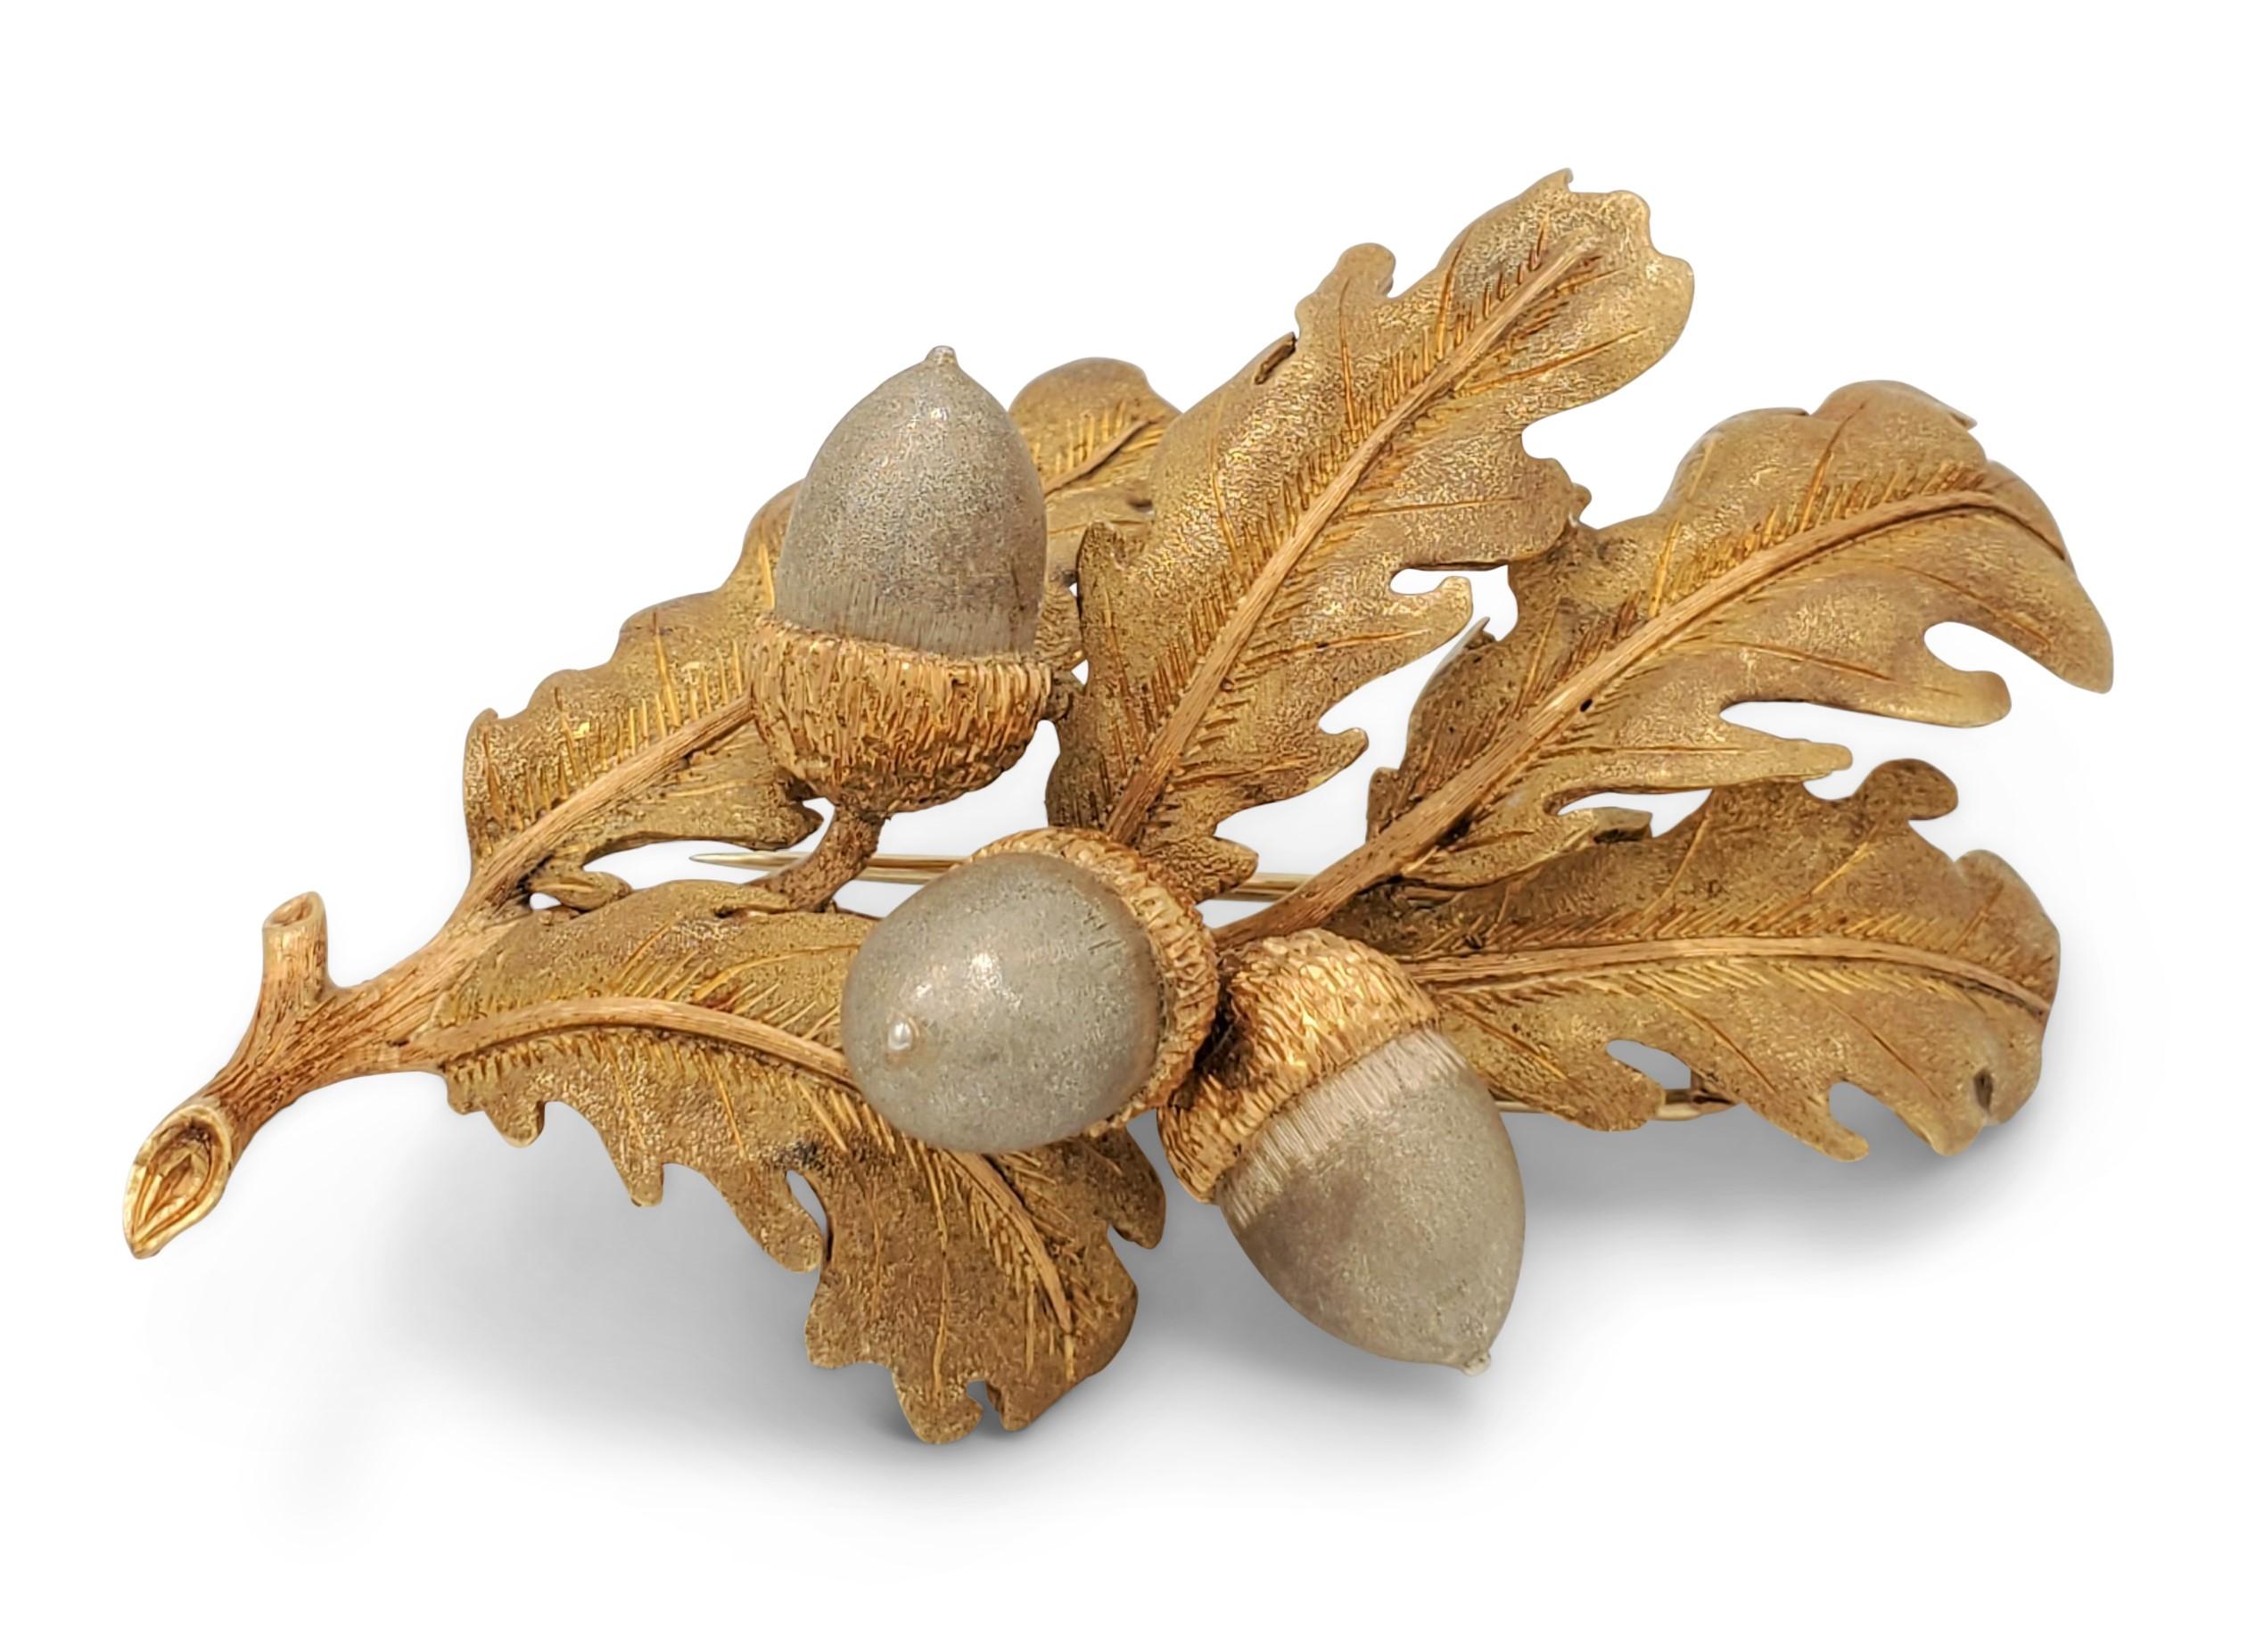 A brooch designed as a series of brushed 18 karat yellow gold oak leaves with three acorns hanging off to the sides. The vein detail on leaves and stems are smooth-polished gold, which adds to the design. The acorns are crafted in brushed 18 karat